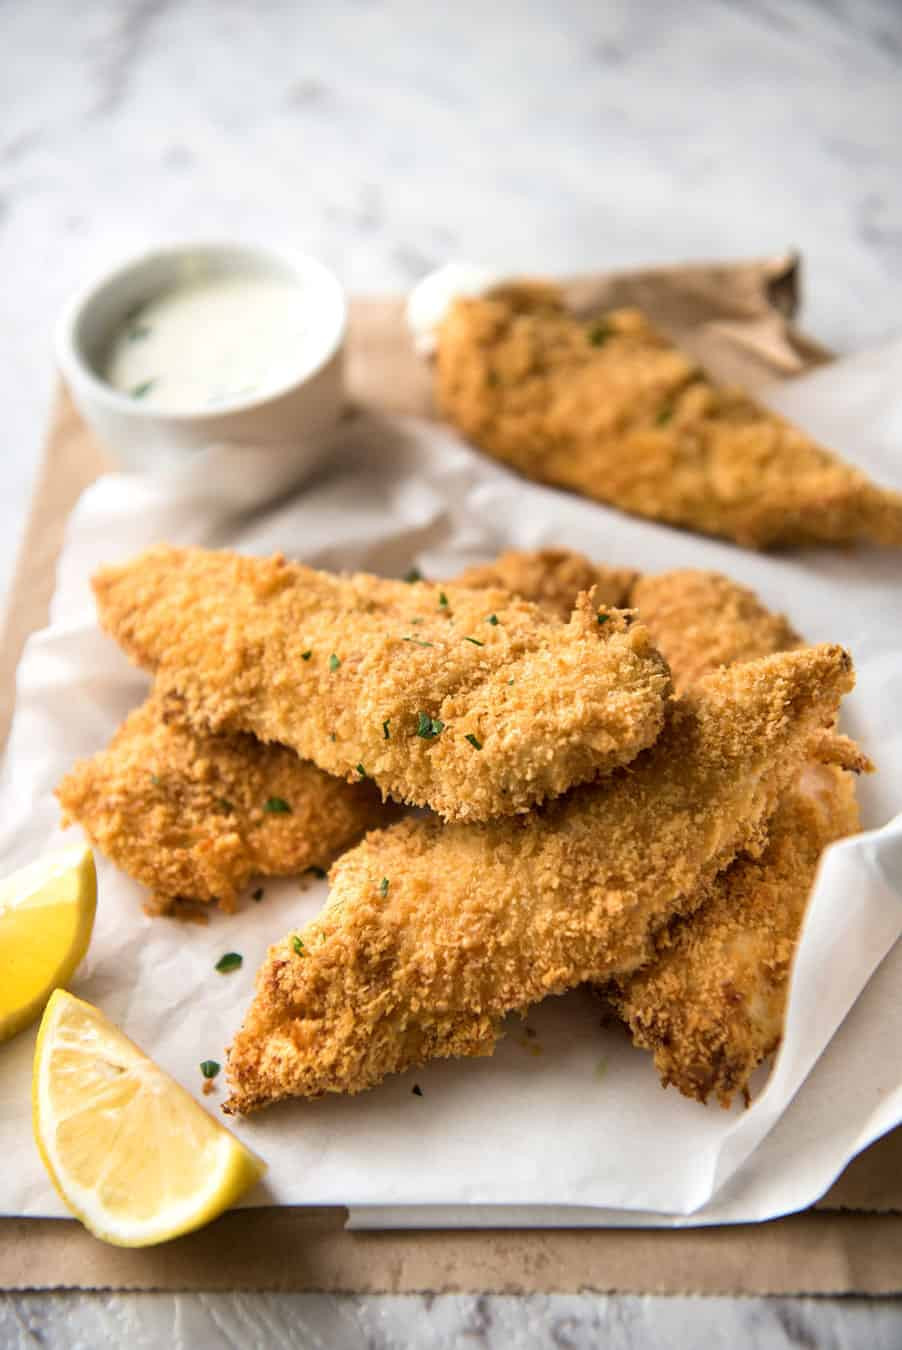 Baked Chicken Tender Recipes
 Oven Fried Parmesan Chicken Tenders